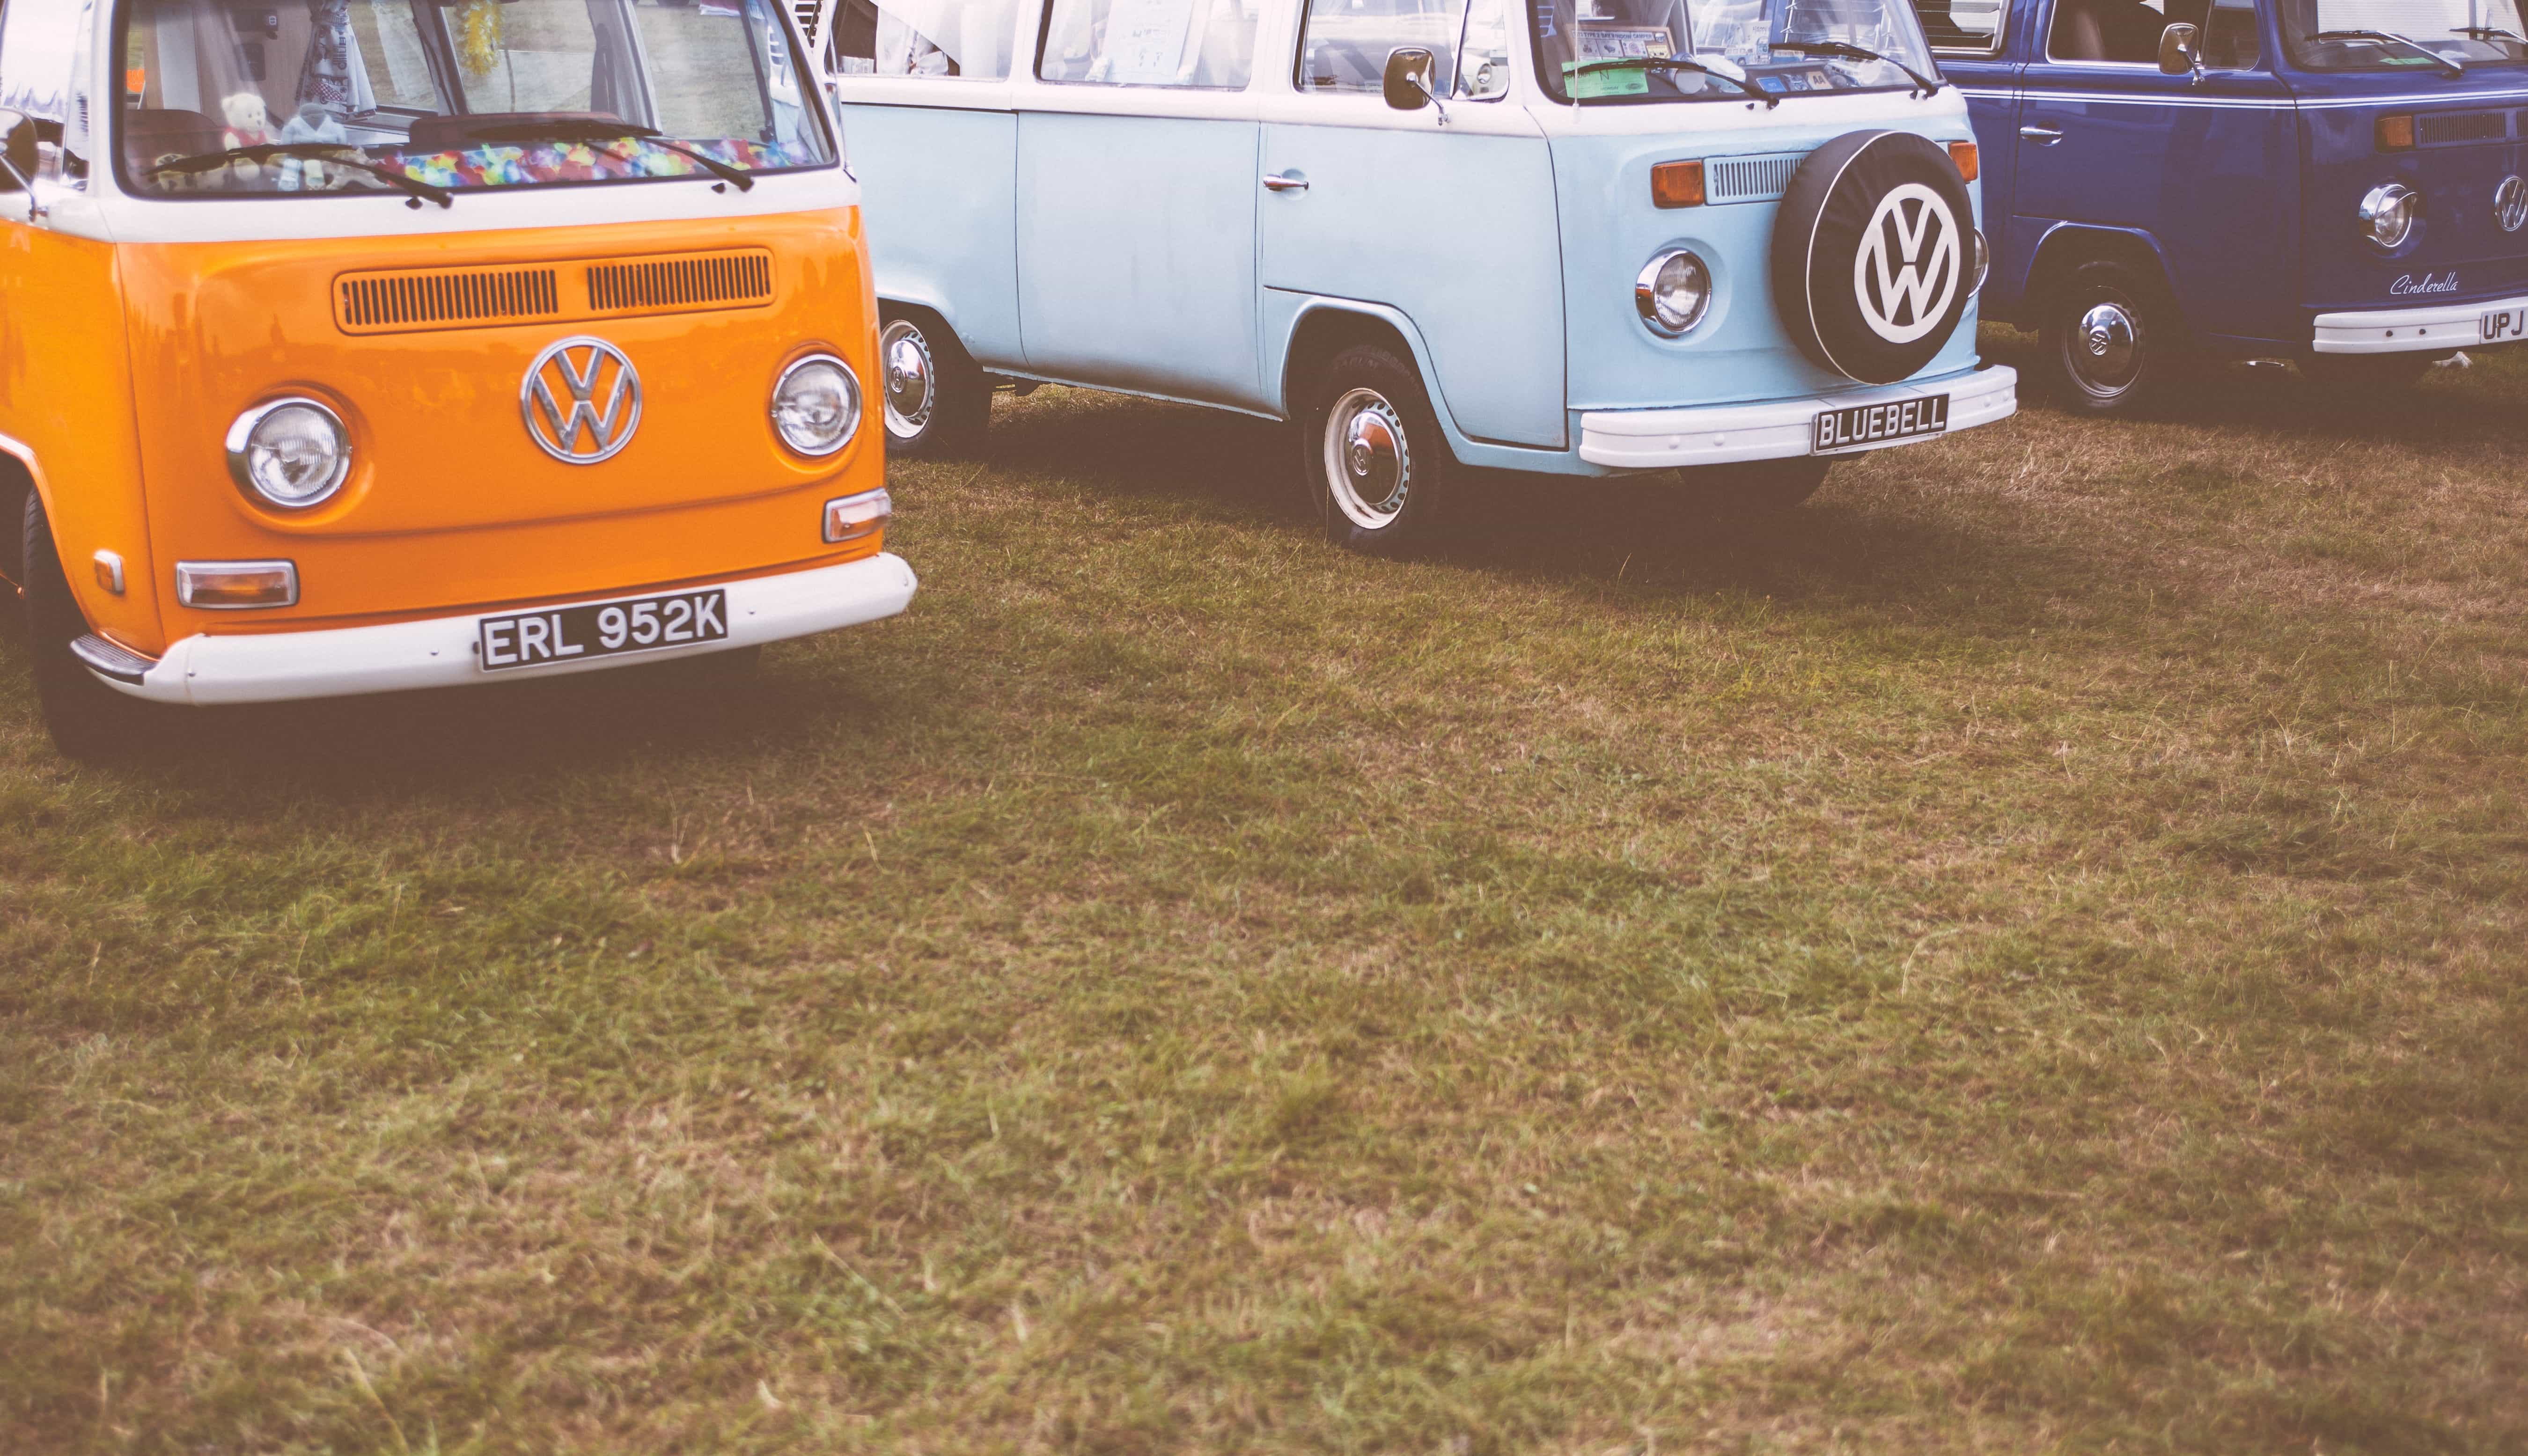 VW vans from the 1960s